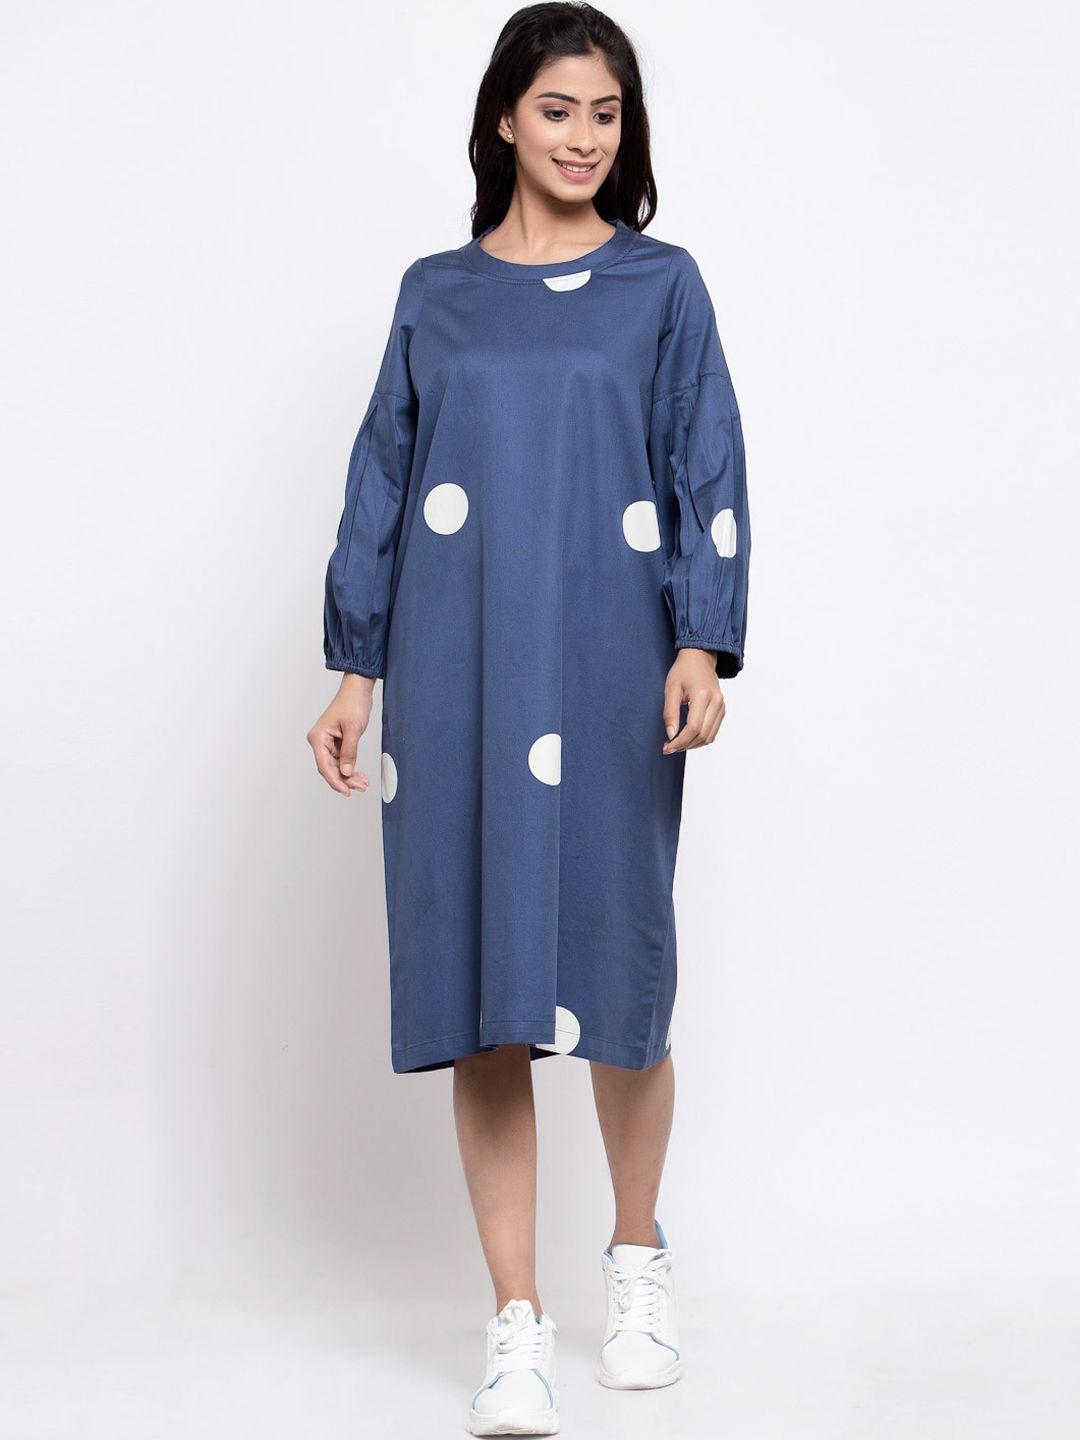 terquois women blue printed a-line dress